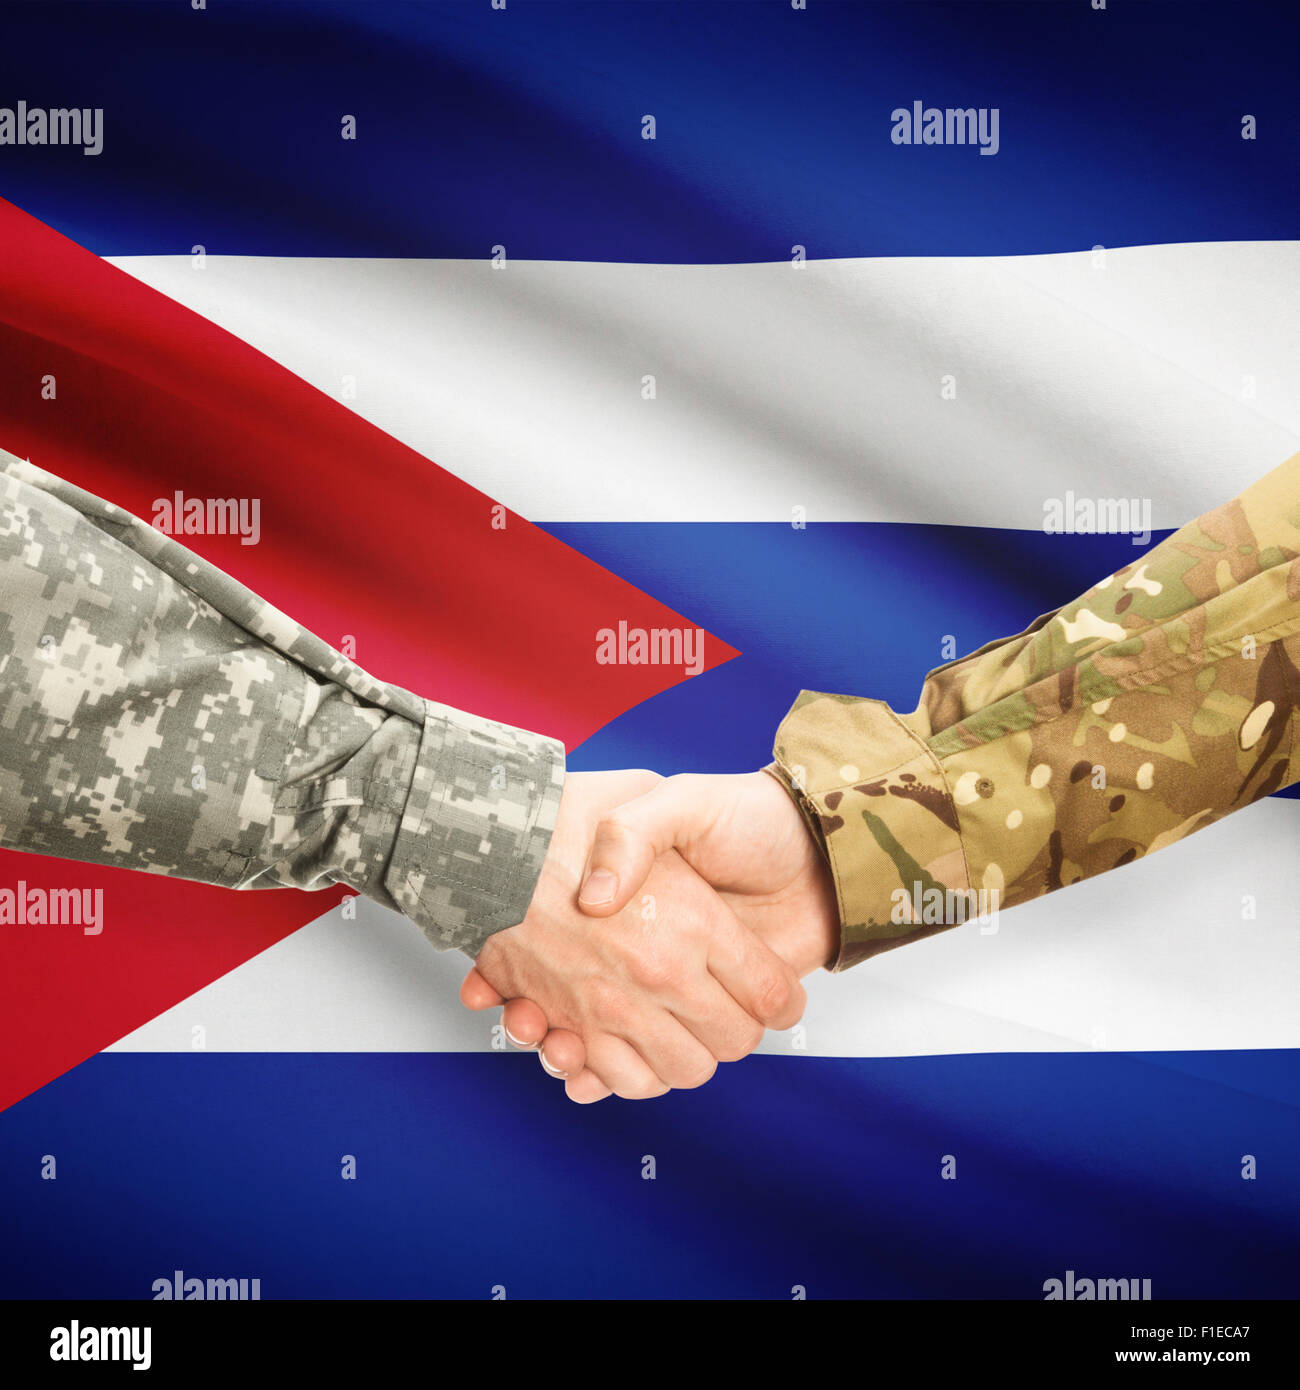 Soldiers shaking hands with flag on background - Cuba Stock Photo